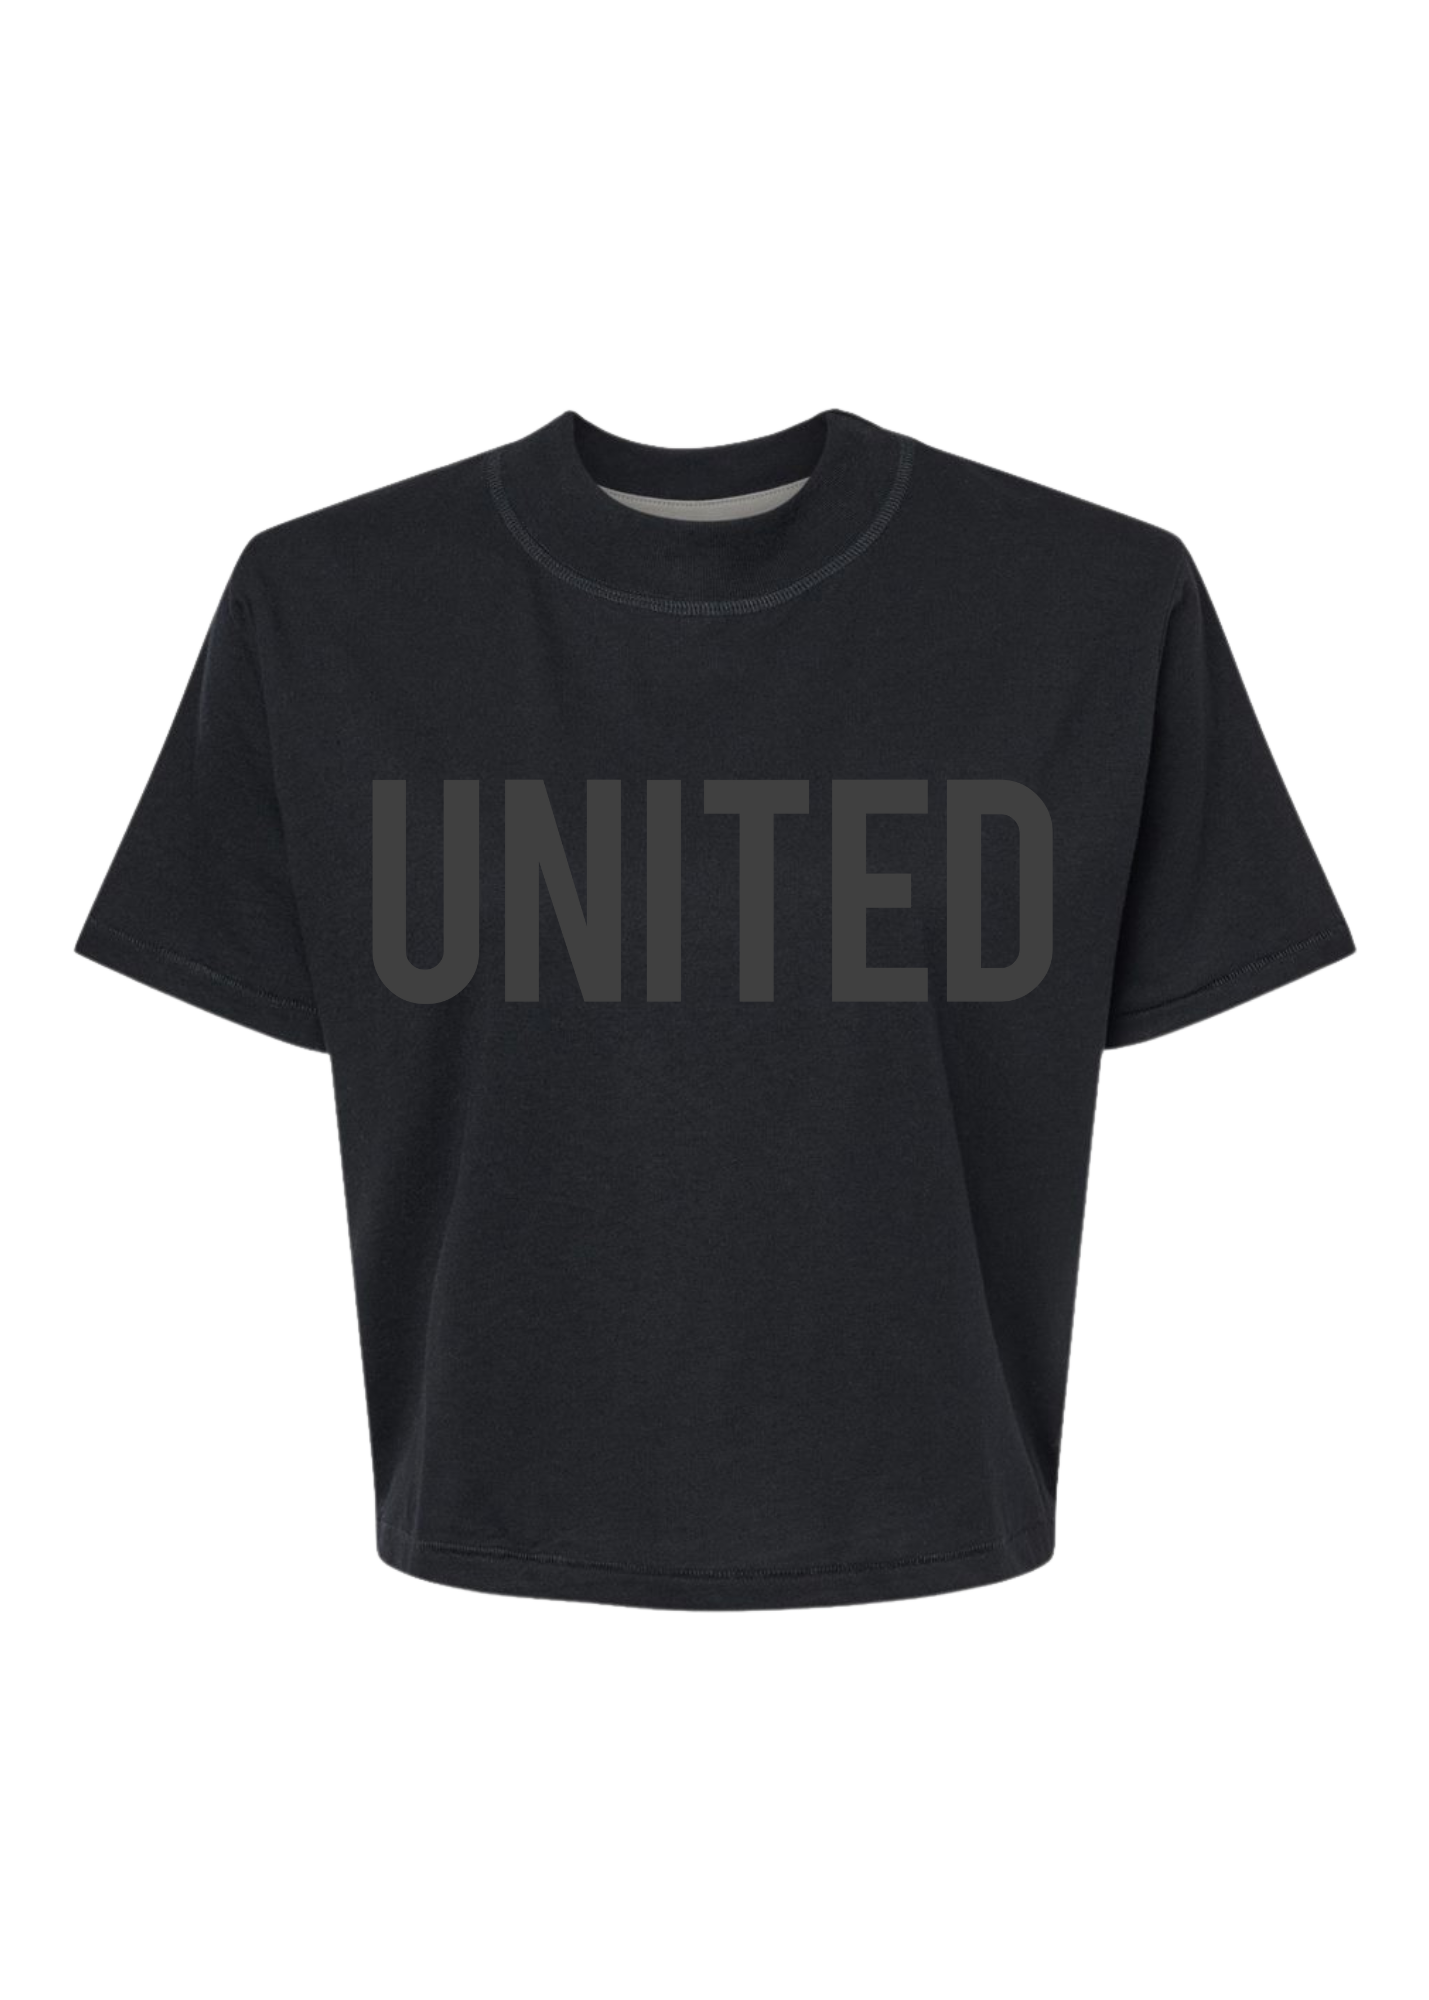 United Tonal | Mom Crop Tee-Adult Tee-Sister Shirts-Sister Shirts, Cute & Custom Tees for Mama & Littles in Trussville, Alabama.